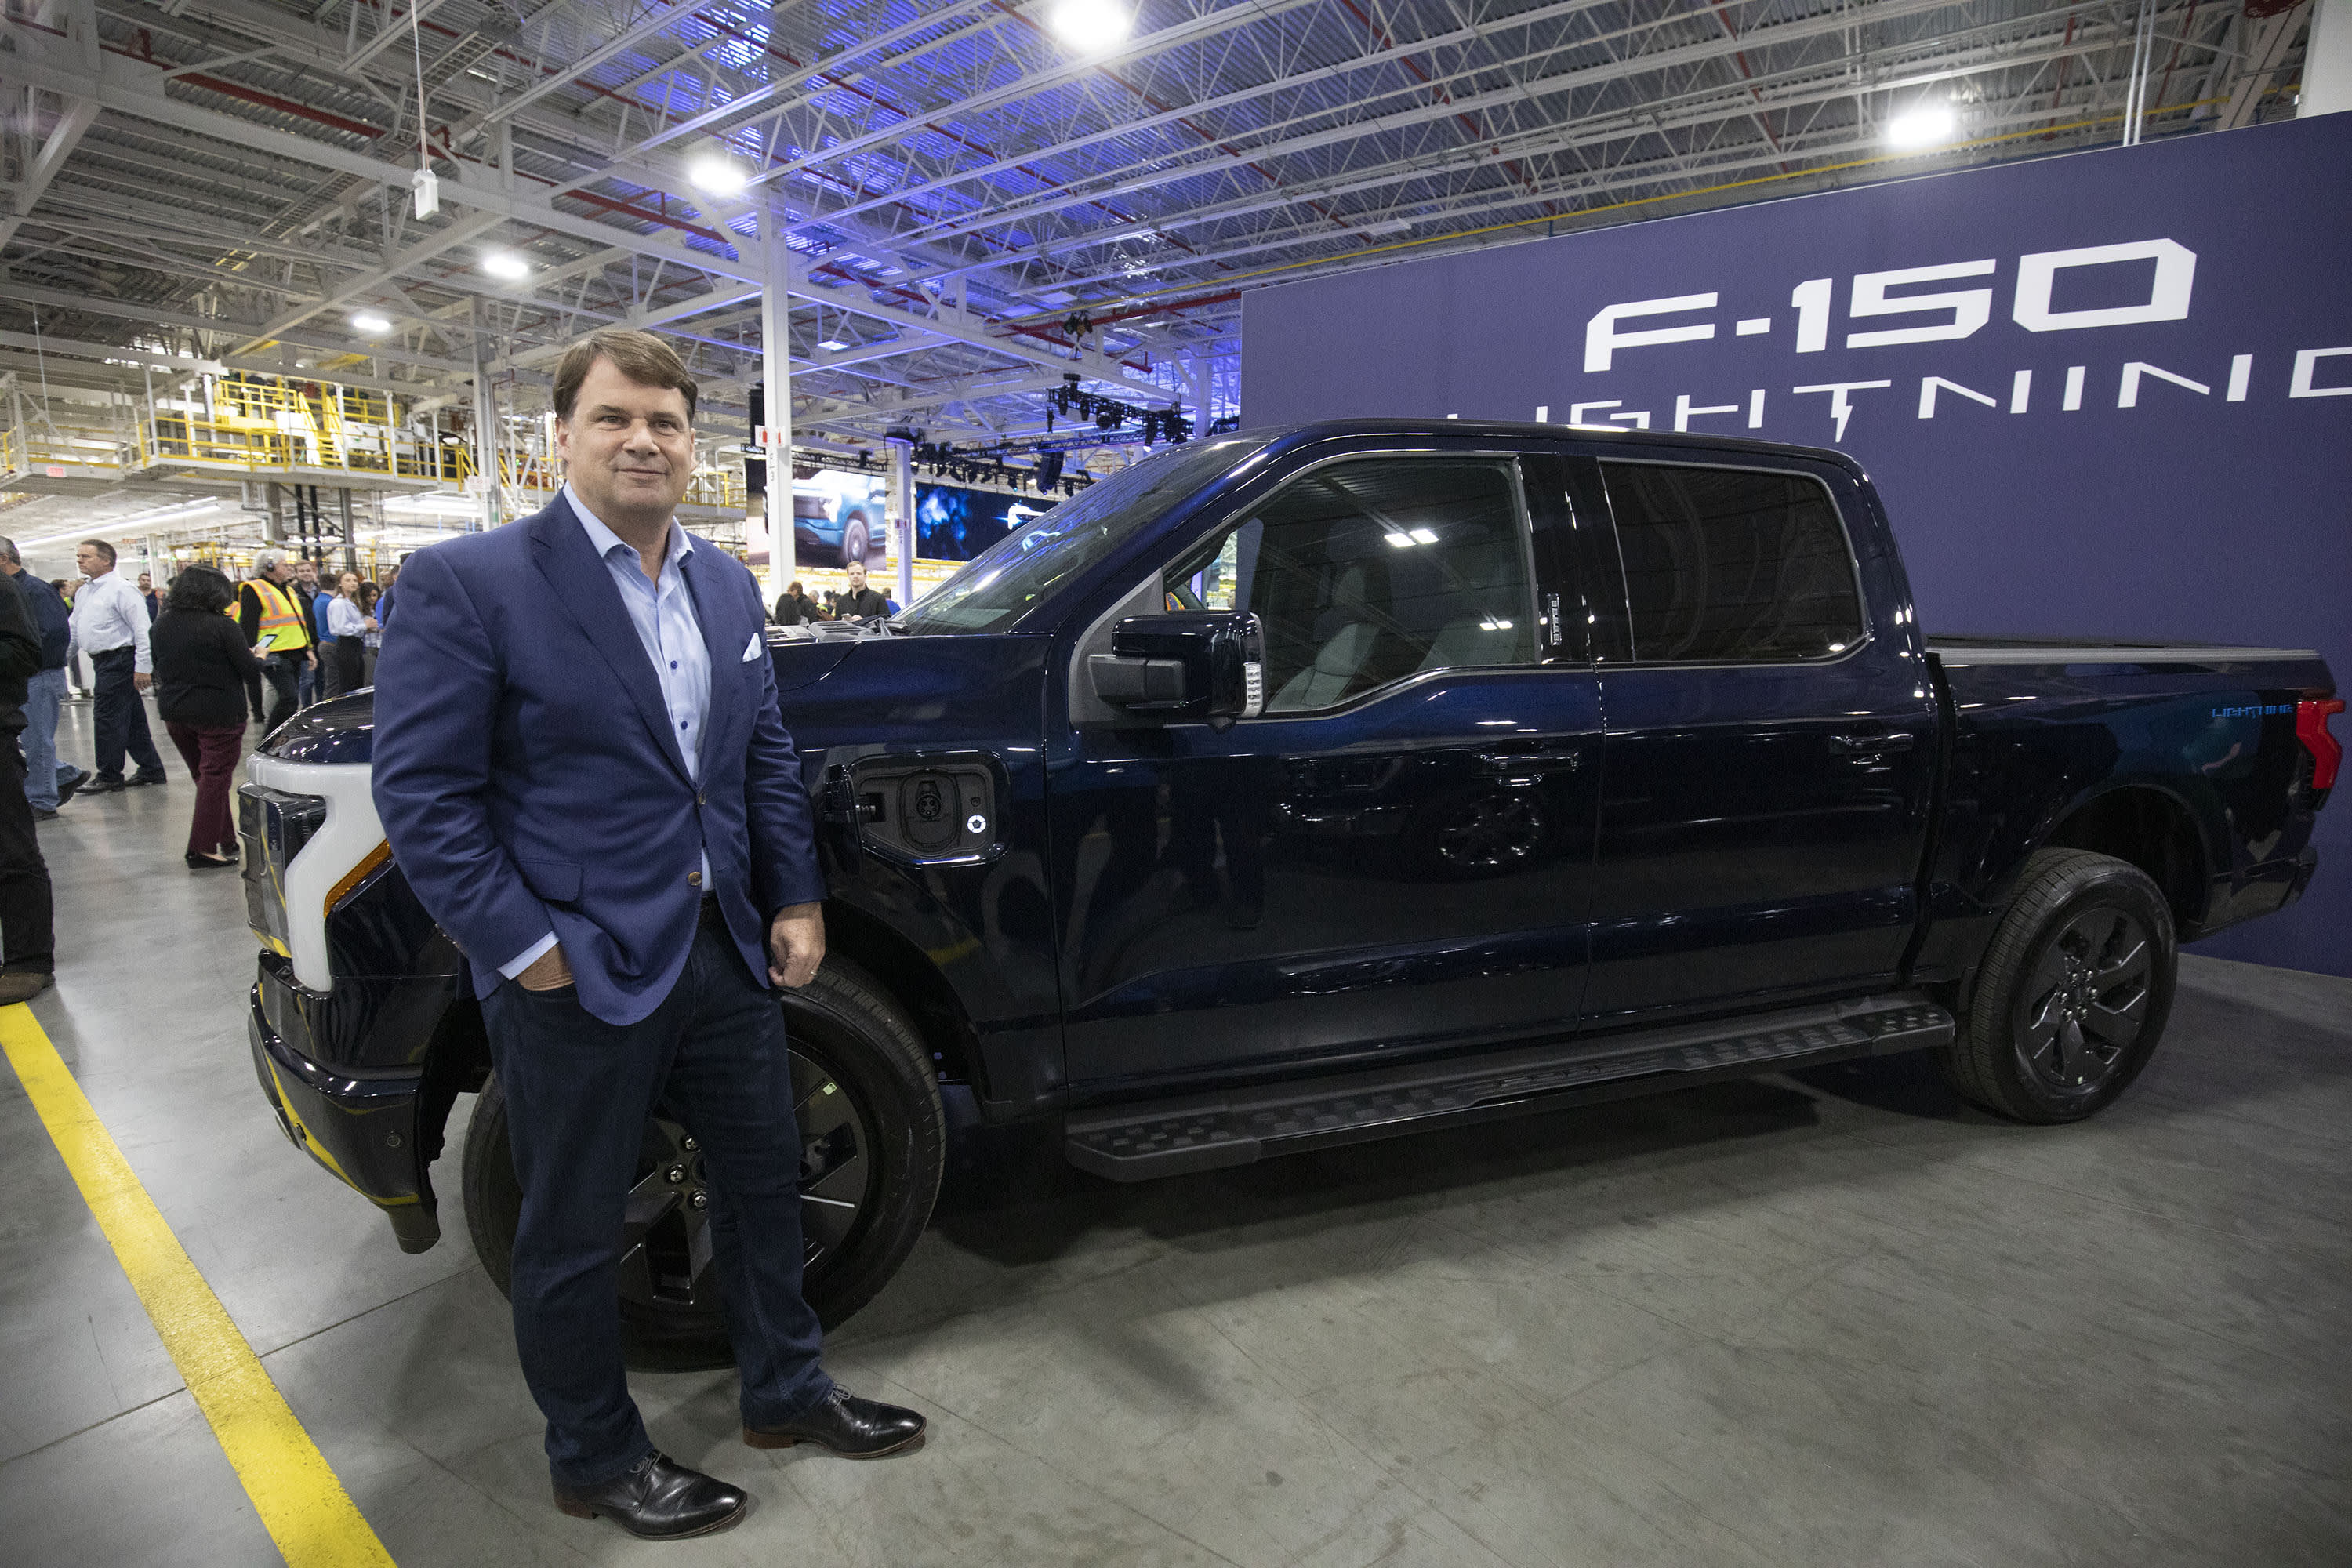 Here are our questions to Ford and CEO Jim Farley about the latest electric vehicle price cuts